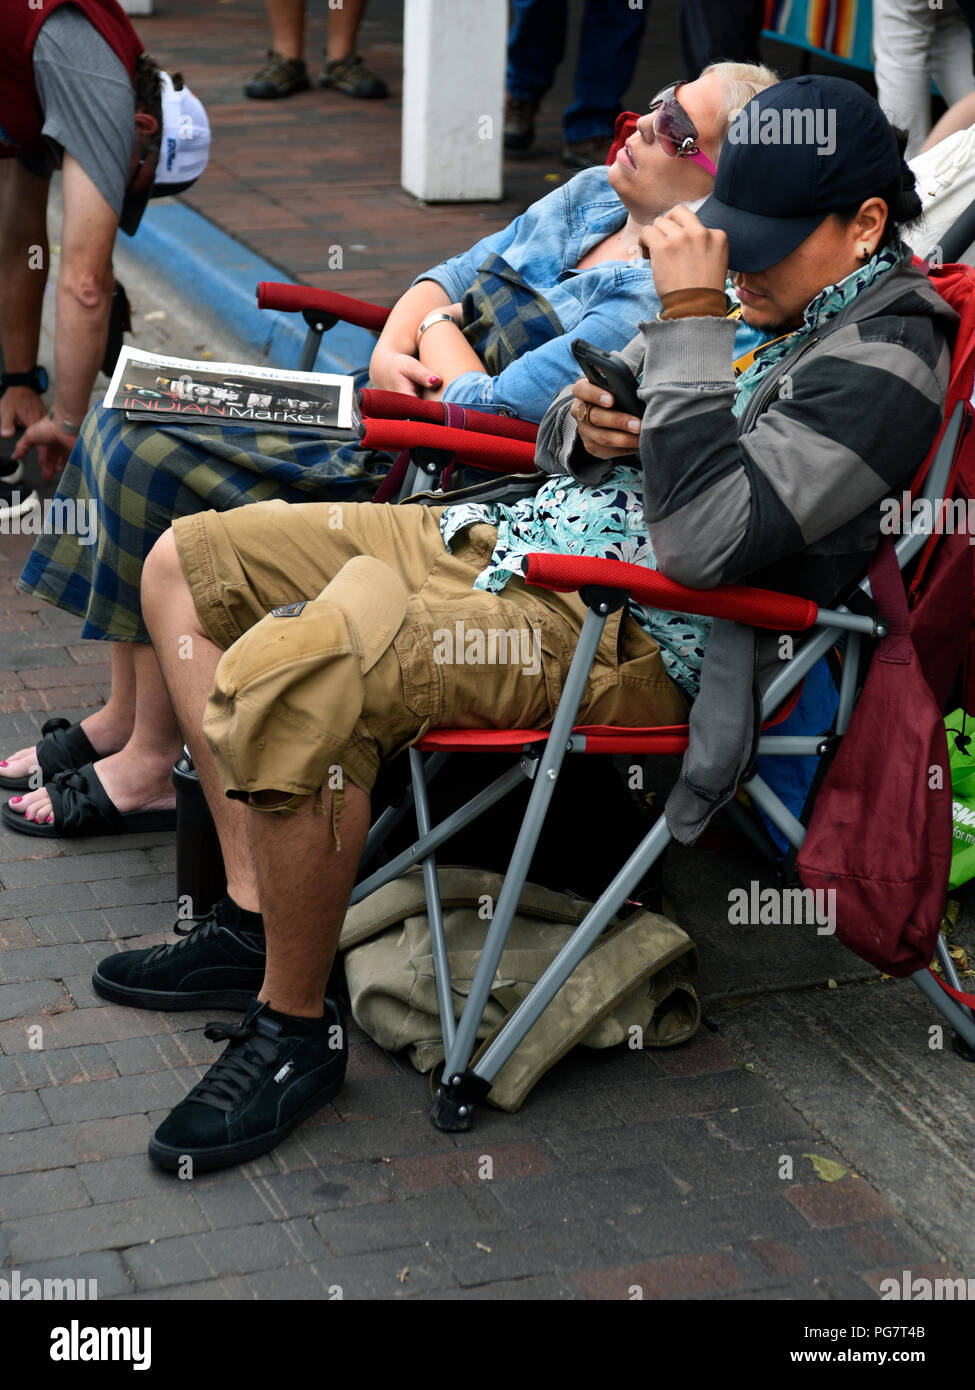 Two exhibitors, one sleeping and the other using his smartphone, sit near their booth at an outdoor art show in Santa Fe, New Mexico. Stock Photo